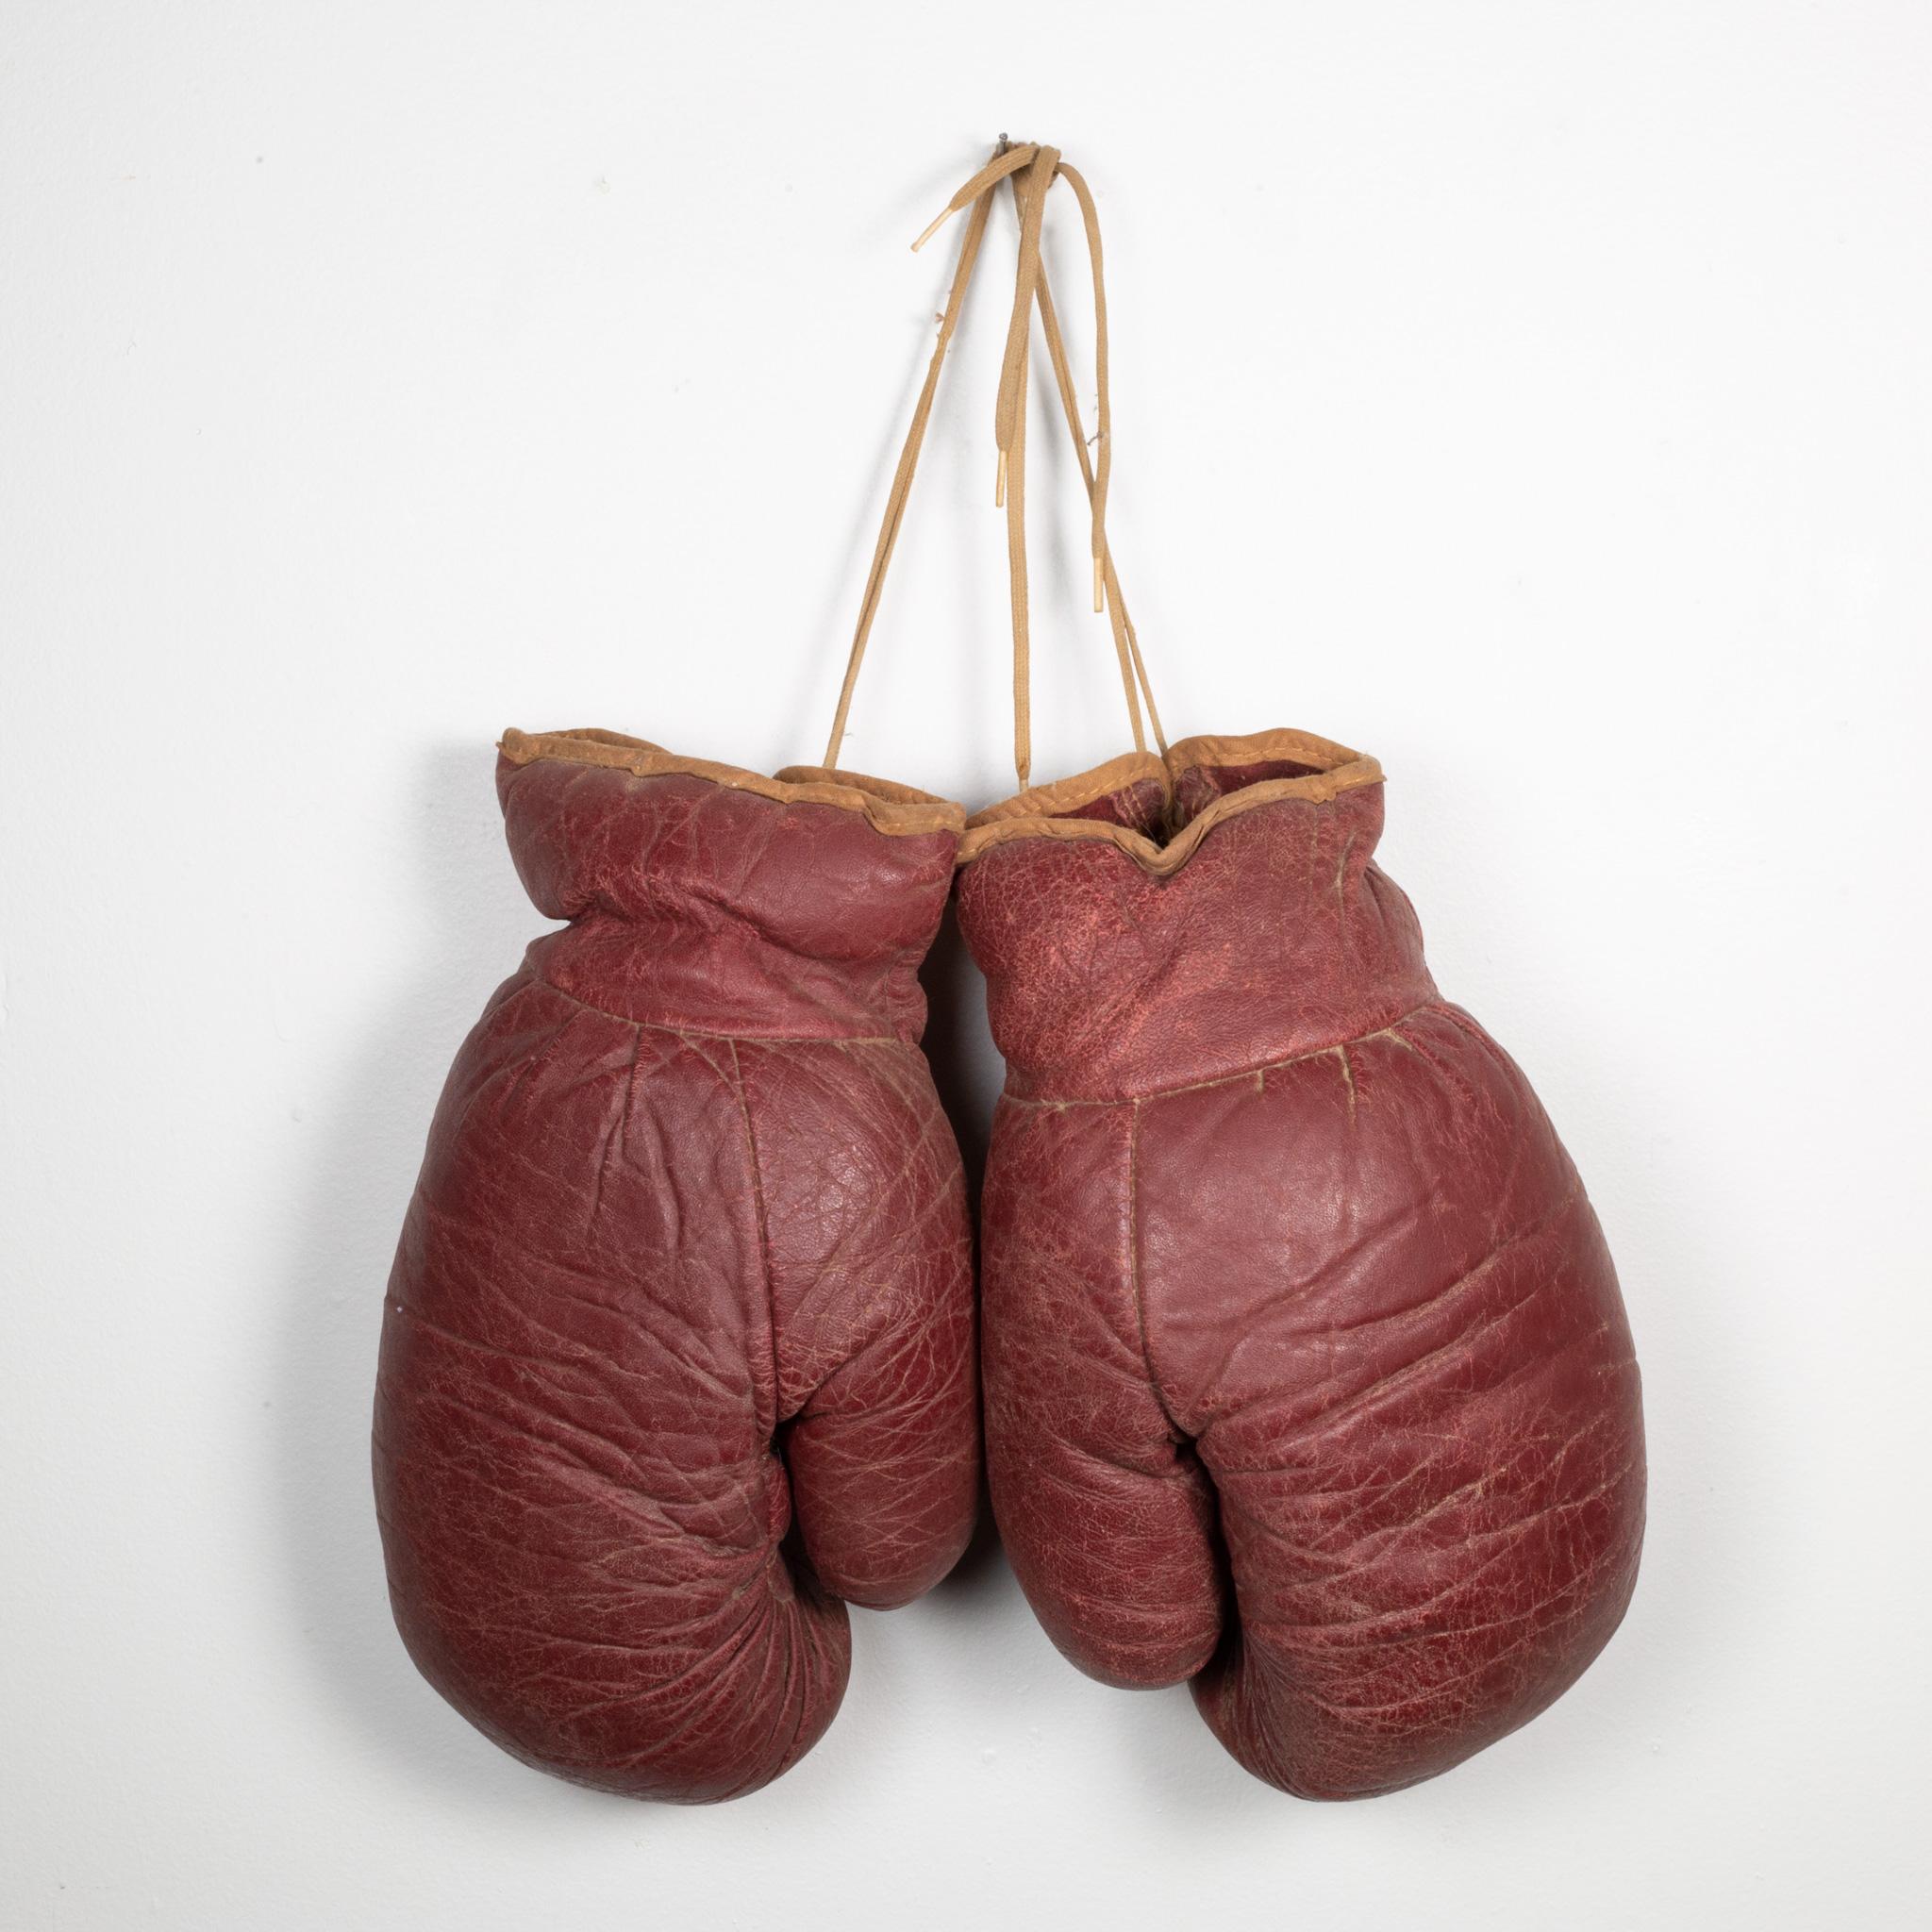 Industrial Vintage Leather Boxing Gloves c.1950